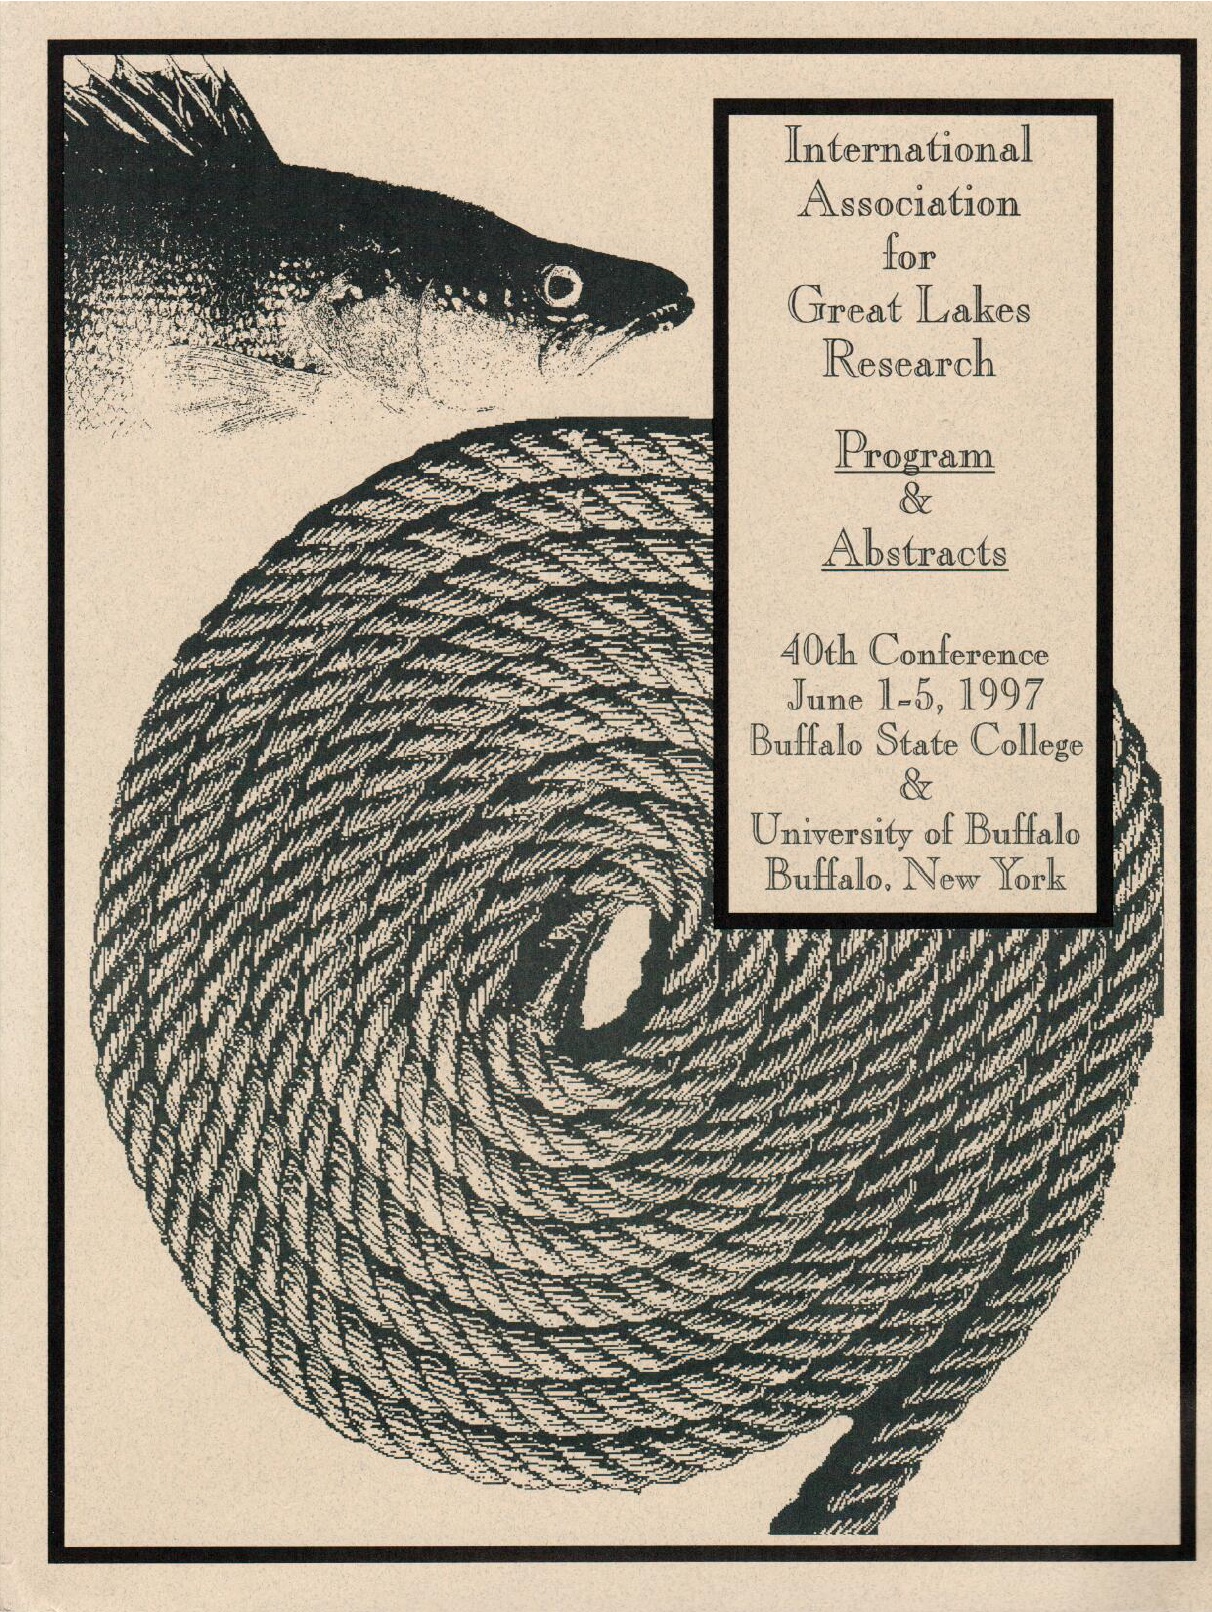 Booklet cover showing a fish and a coiled rope. Text reads: "International Association for Great Lakes Research. Program & Abstracts. 40th Conference, June 1-5, 1997, Buffalo State College & University of Buffalo, Buffalo, NY"